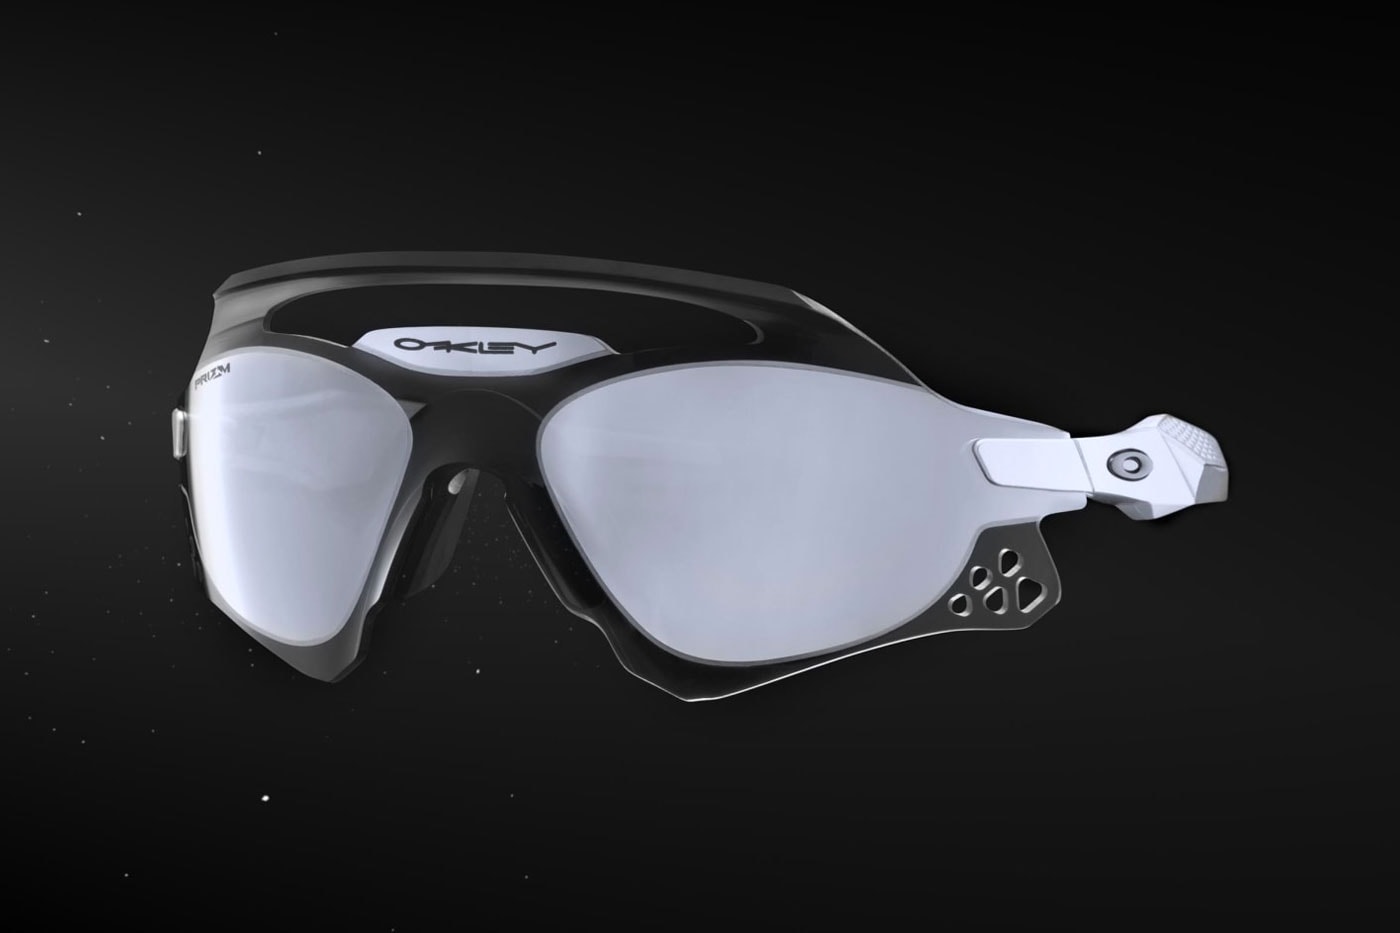 Oakley brings back its iconic X Metal frames in a new limited edition -  Acquire